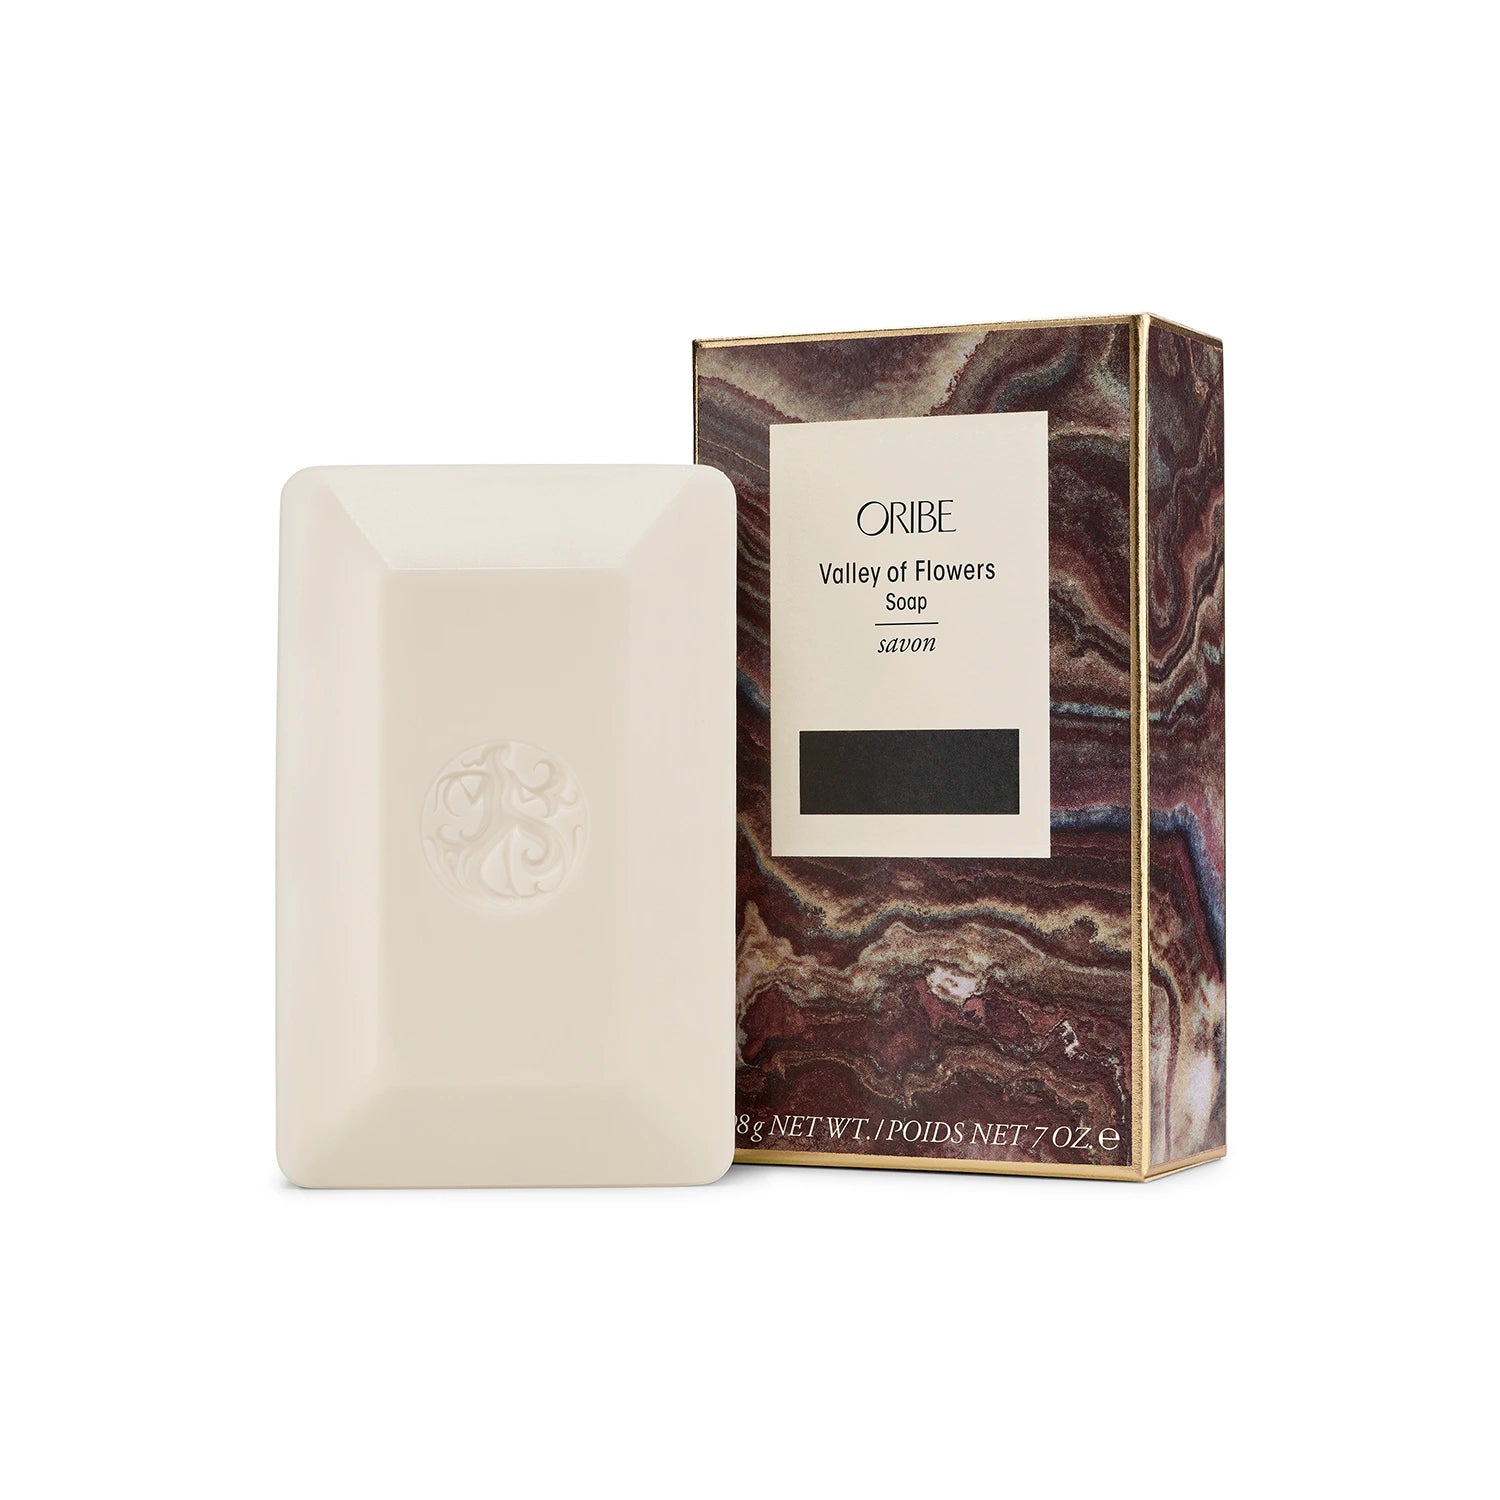 ORIBE - Valley of Flowers Soap (198g)